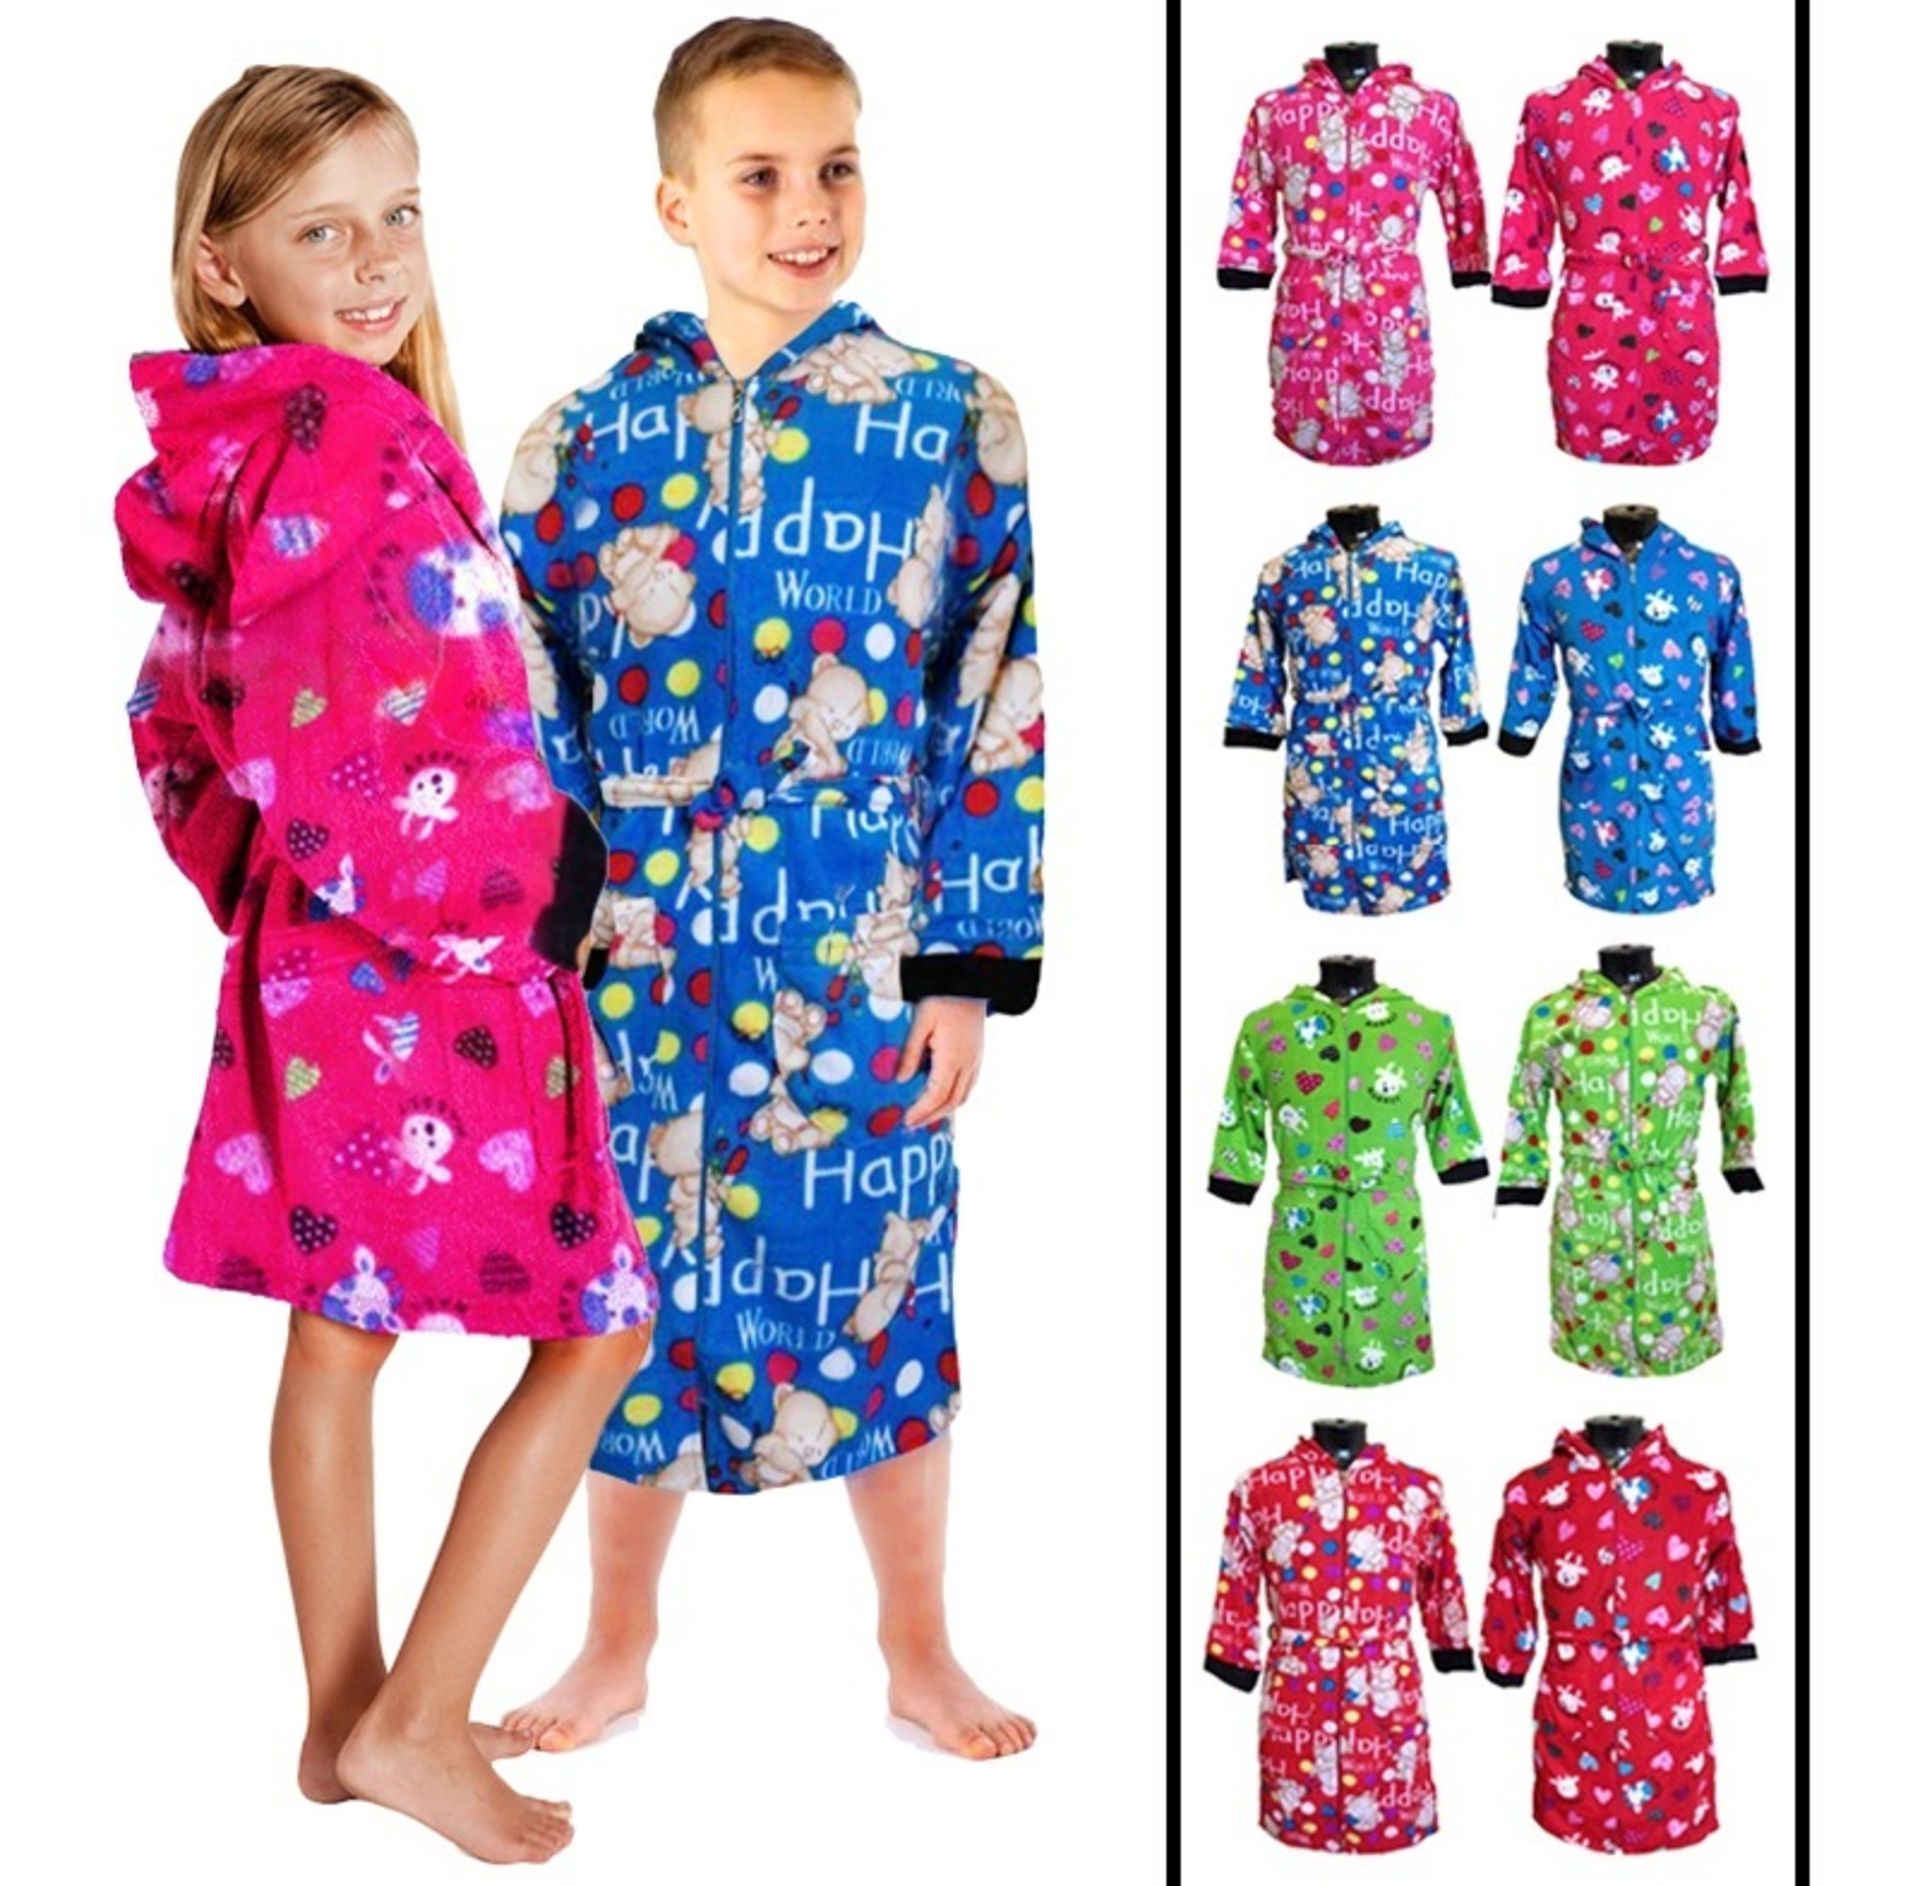 4x pcs Animal Design Bathrobes with Hood - Robes have Zip Closure, Large Pockets and Belt - Pink,